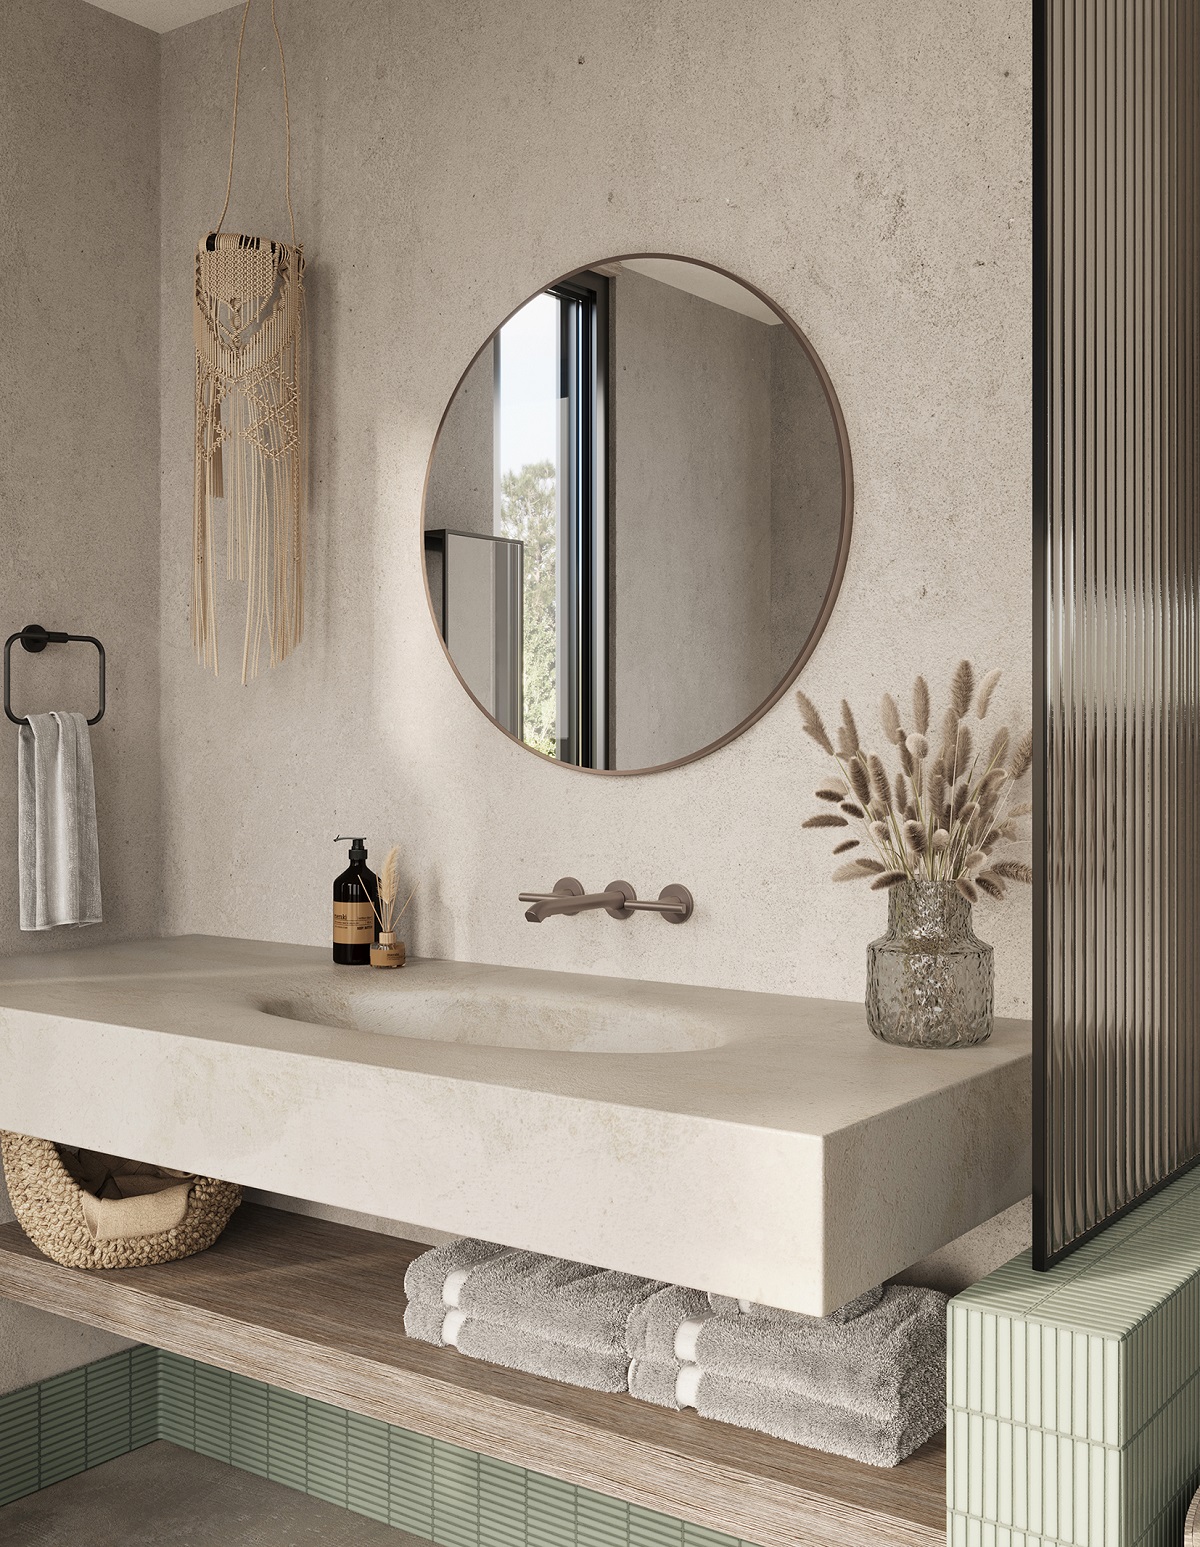 natural stone coloured bathroom with round mirror, dried flowers and macrame